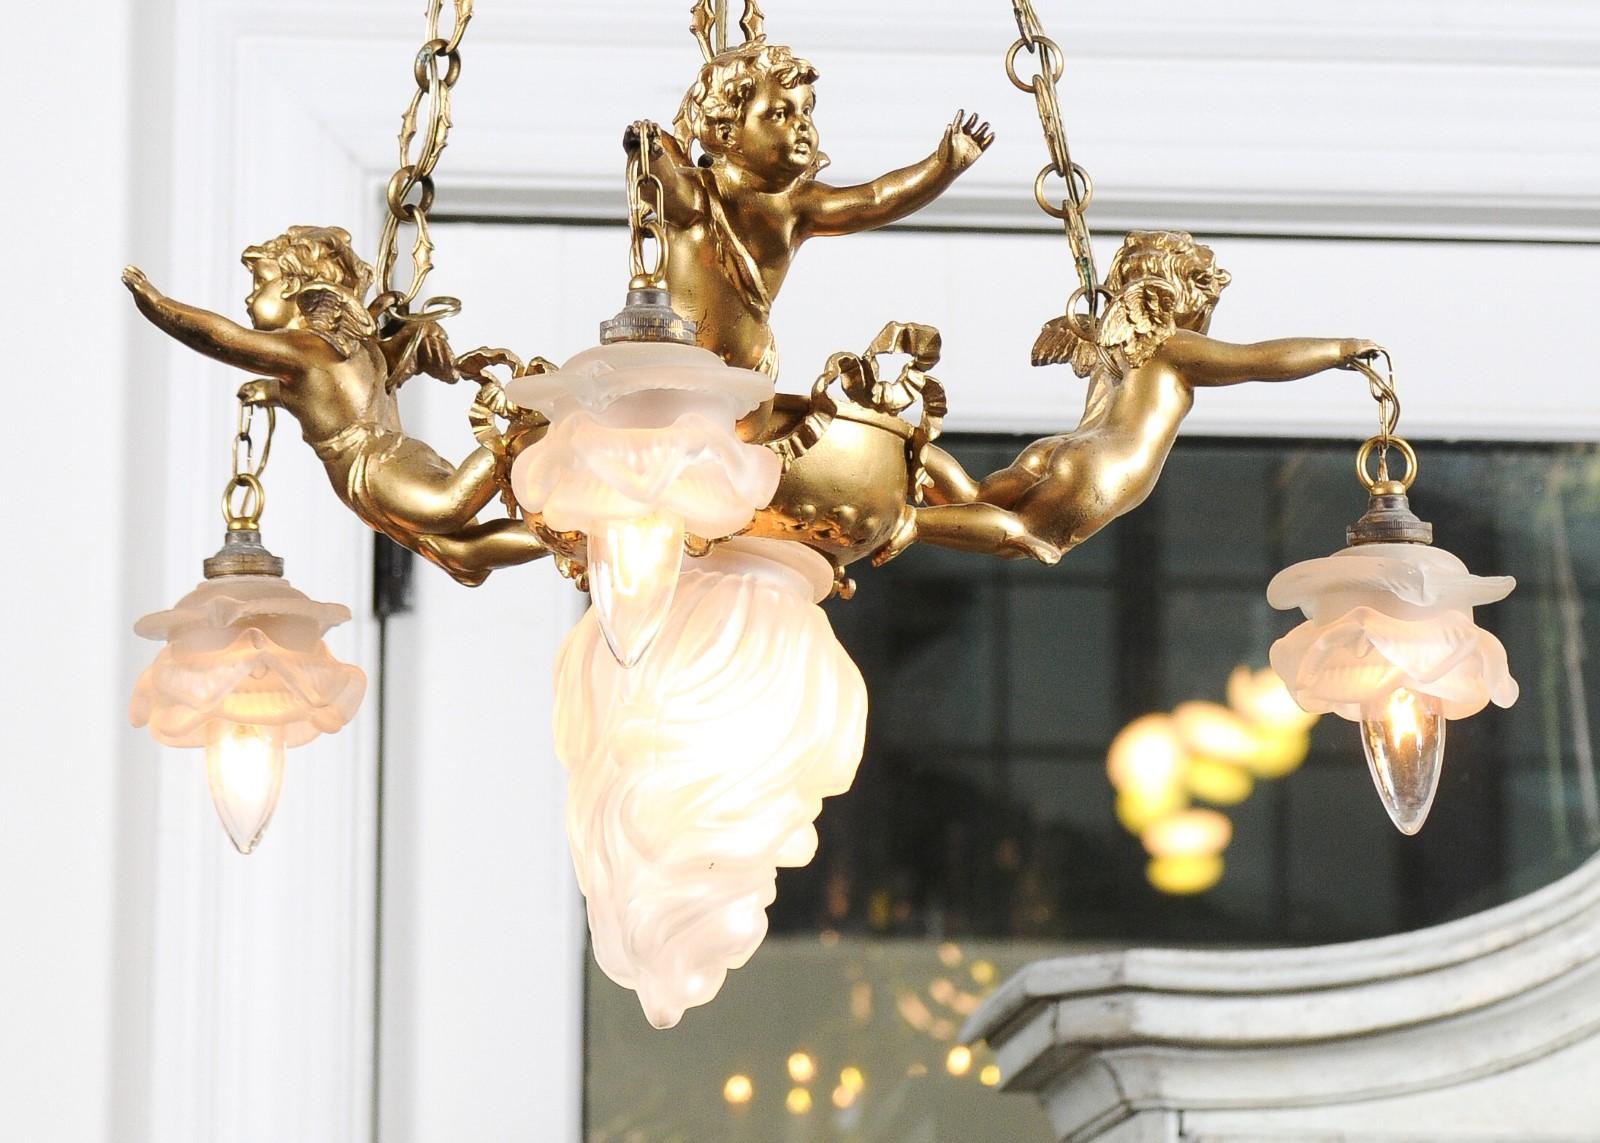 French 19th Century Gilt Metal Chandelier with Three Cherubs Holding the Lights For Sale 1